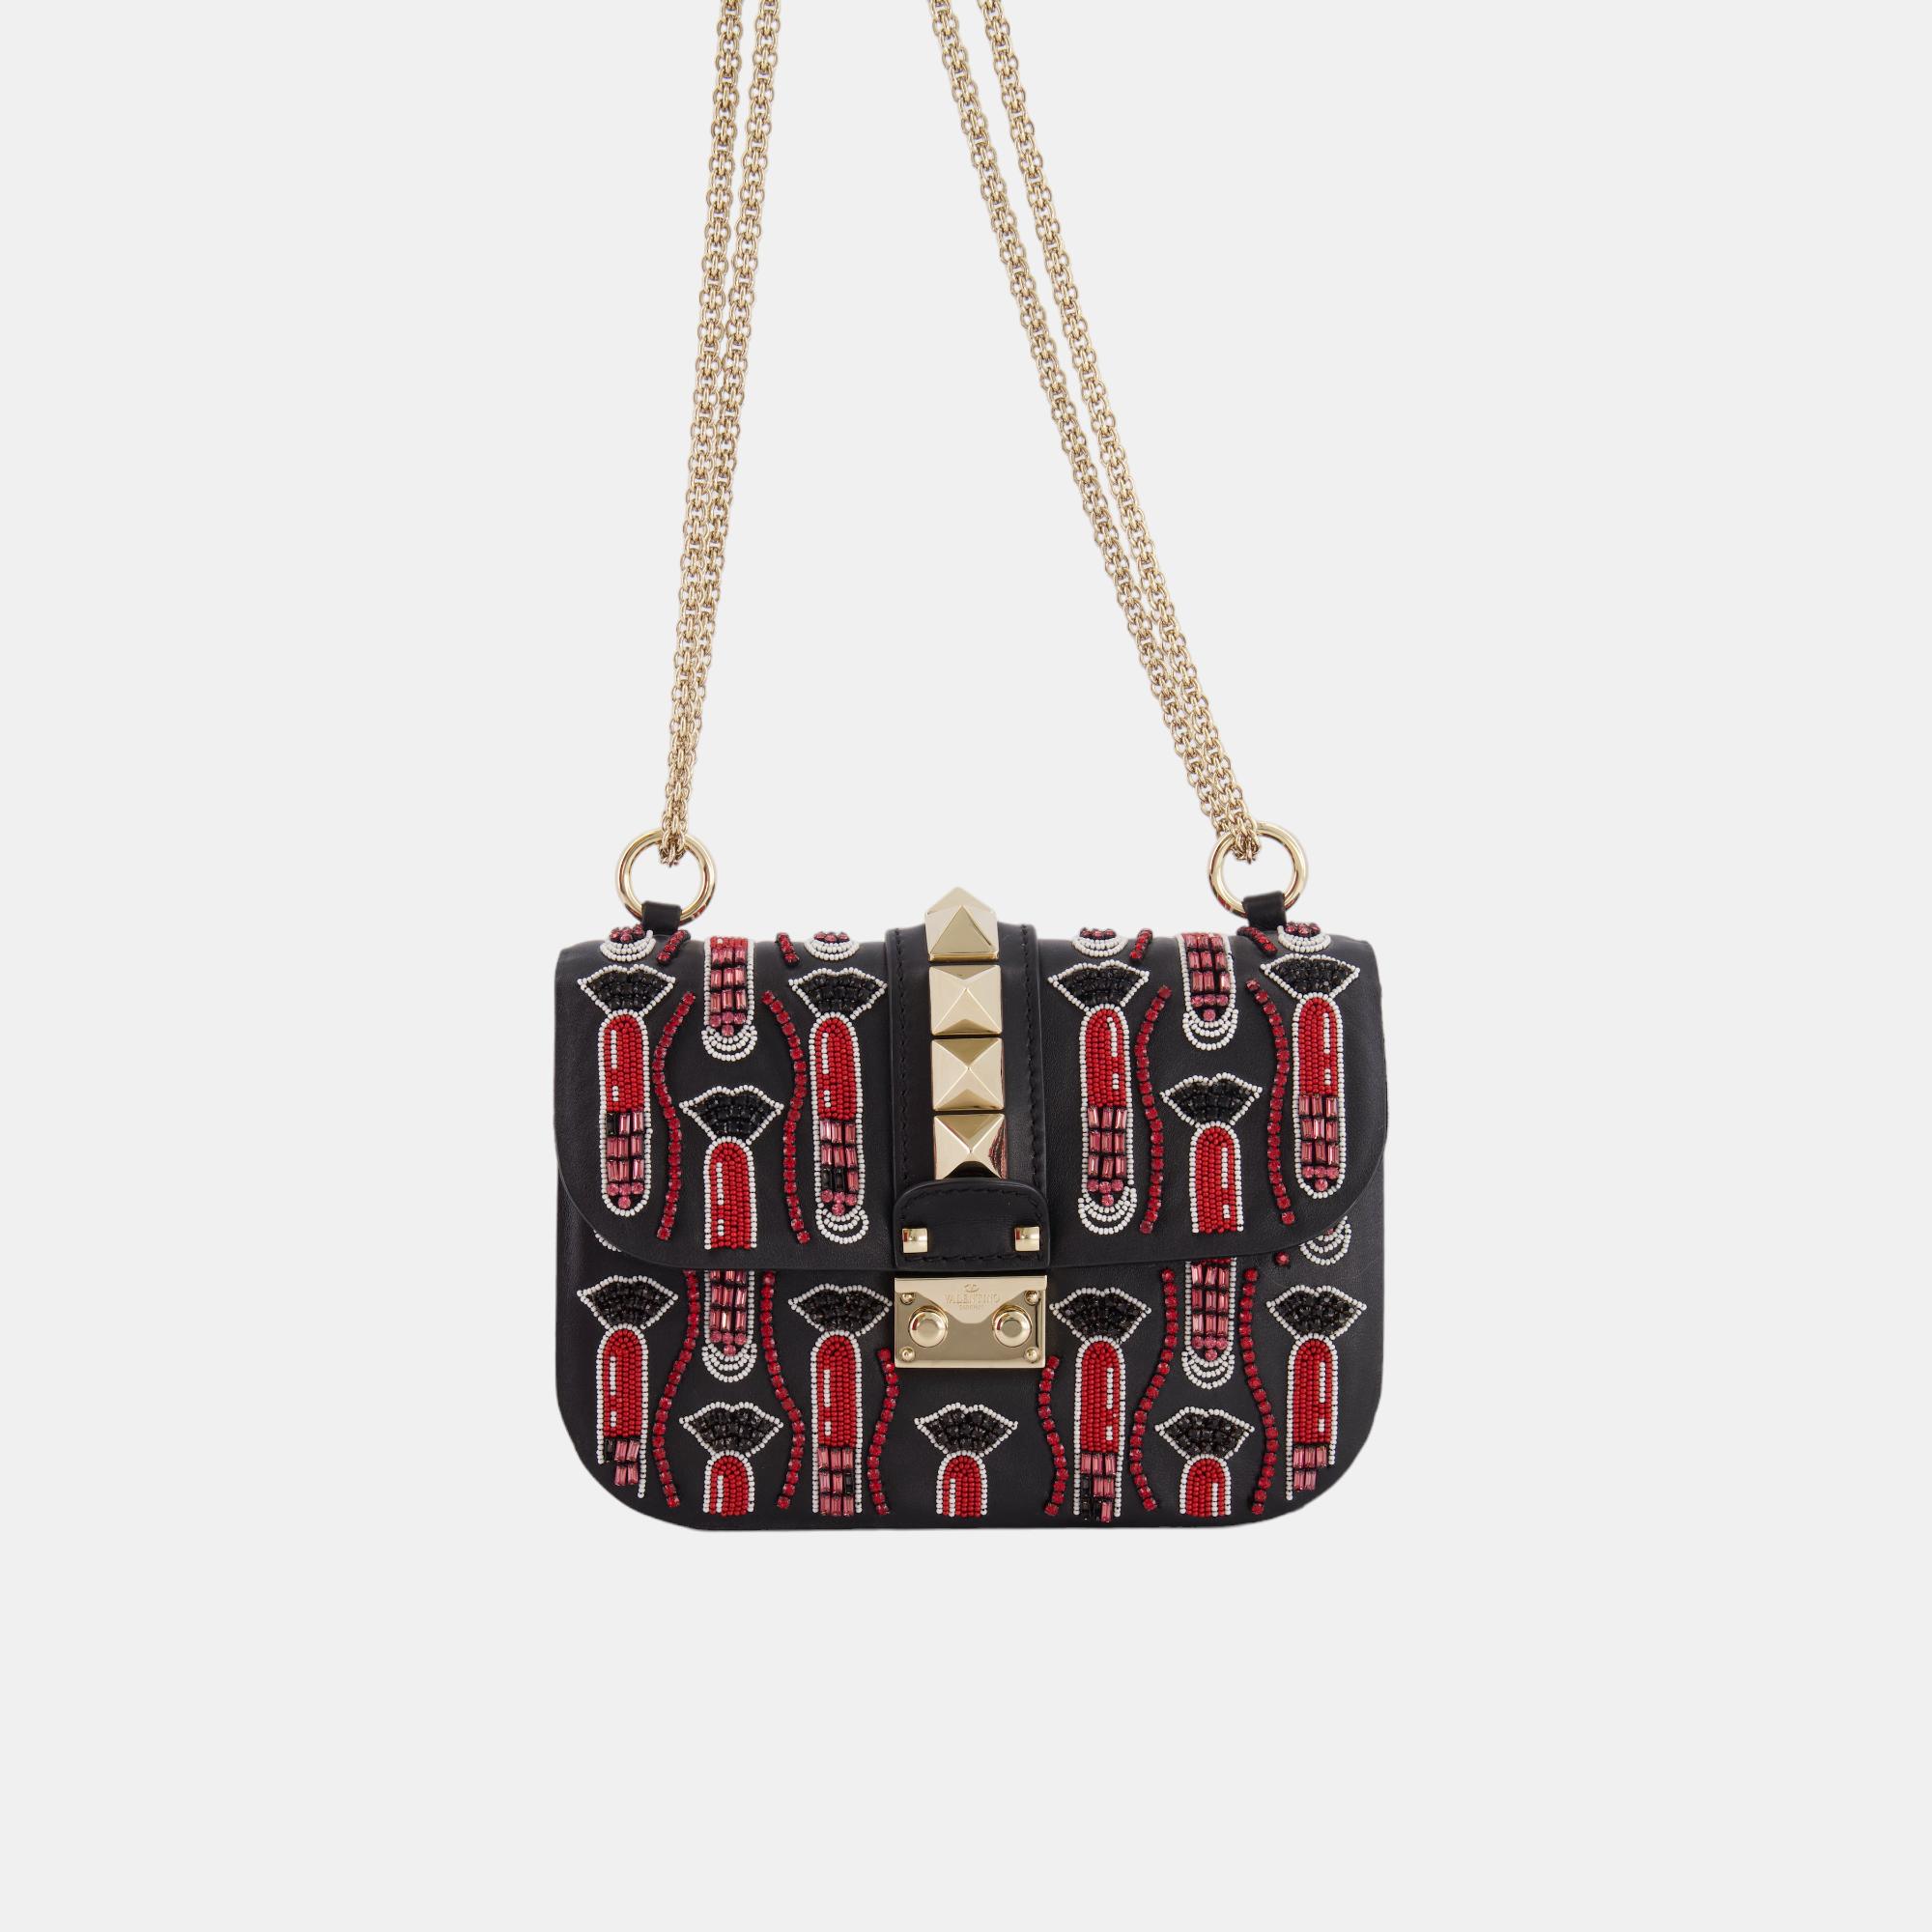 Valentino X Zandra Rhodes Black And Red Crystal Lock Shoulder Bag With Gold Hardware